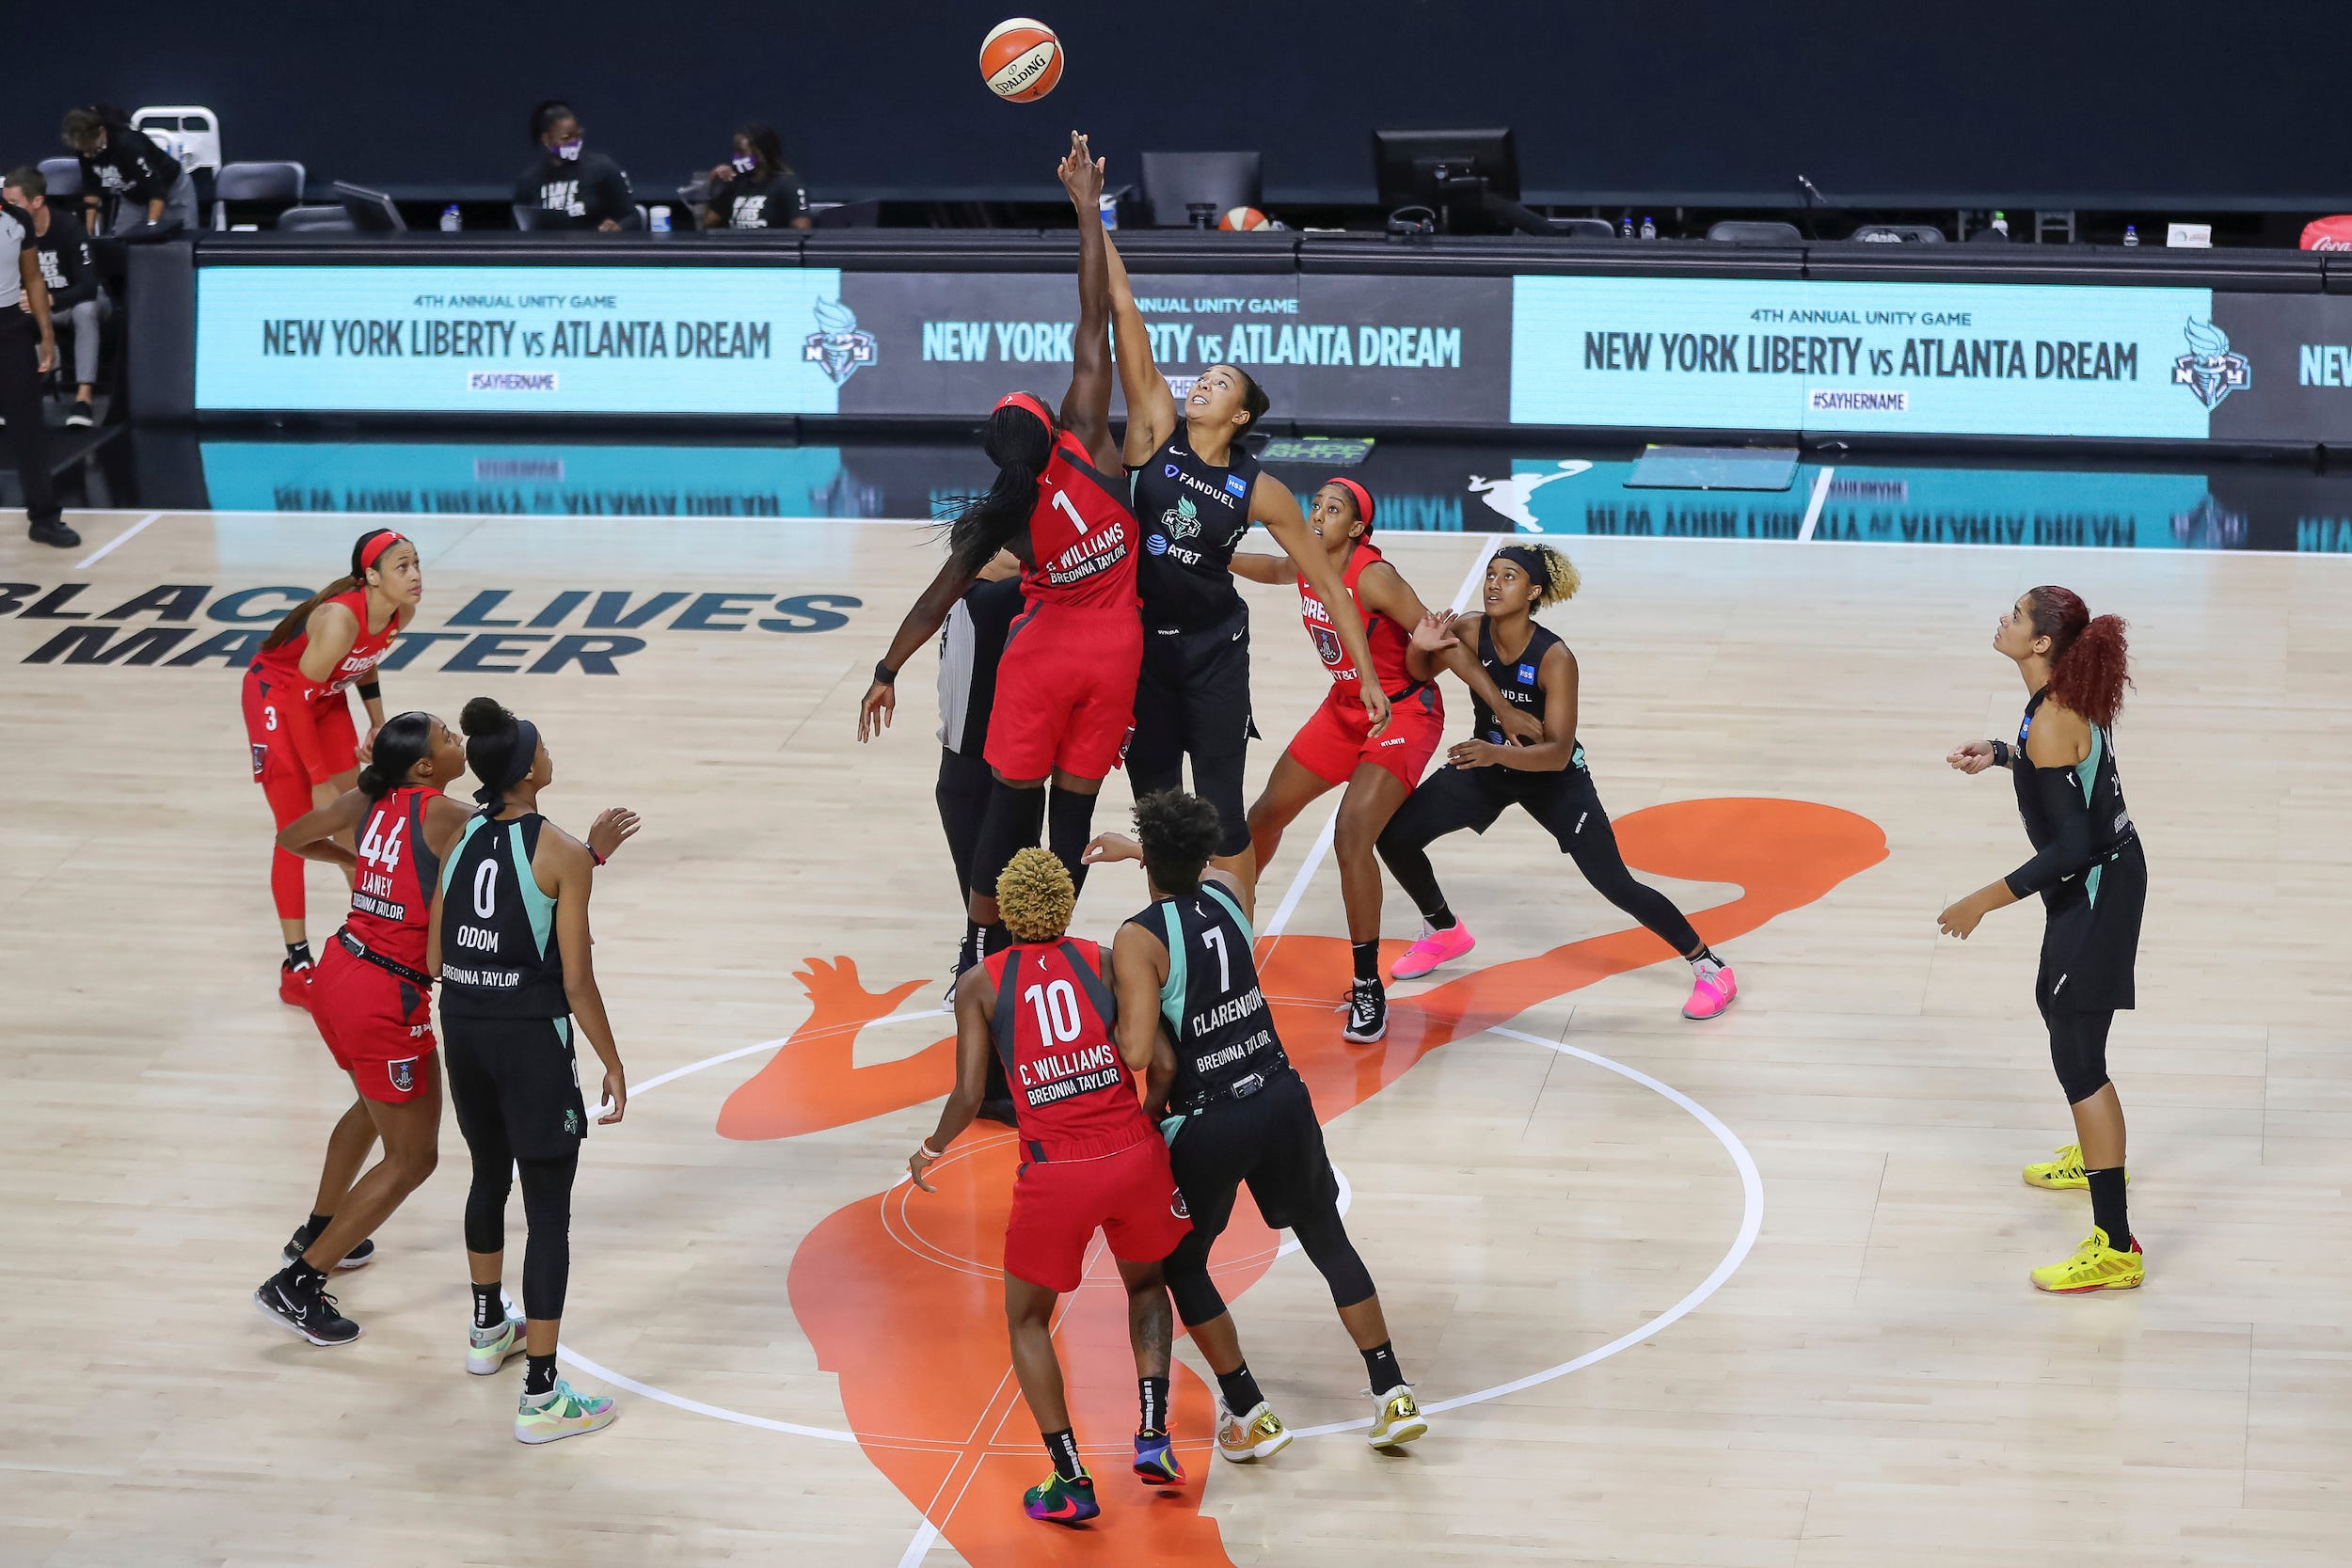 A WNBA game tips off between the Atlanta Dream and New York Liberty.